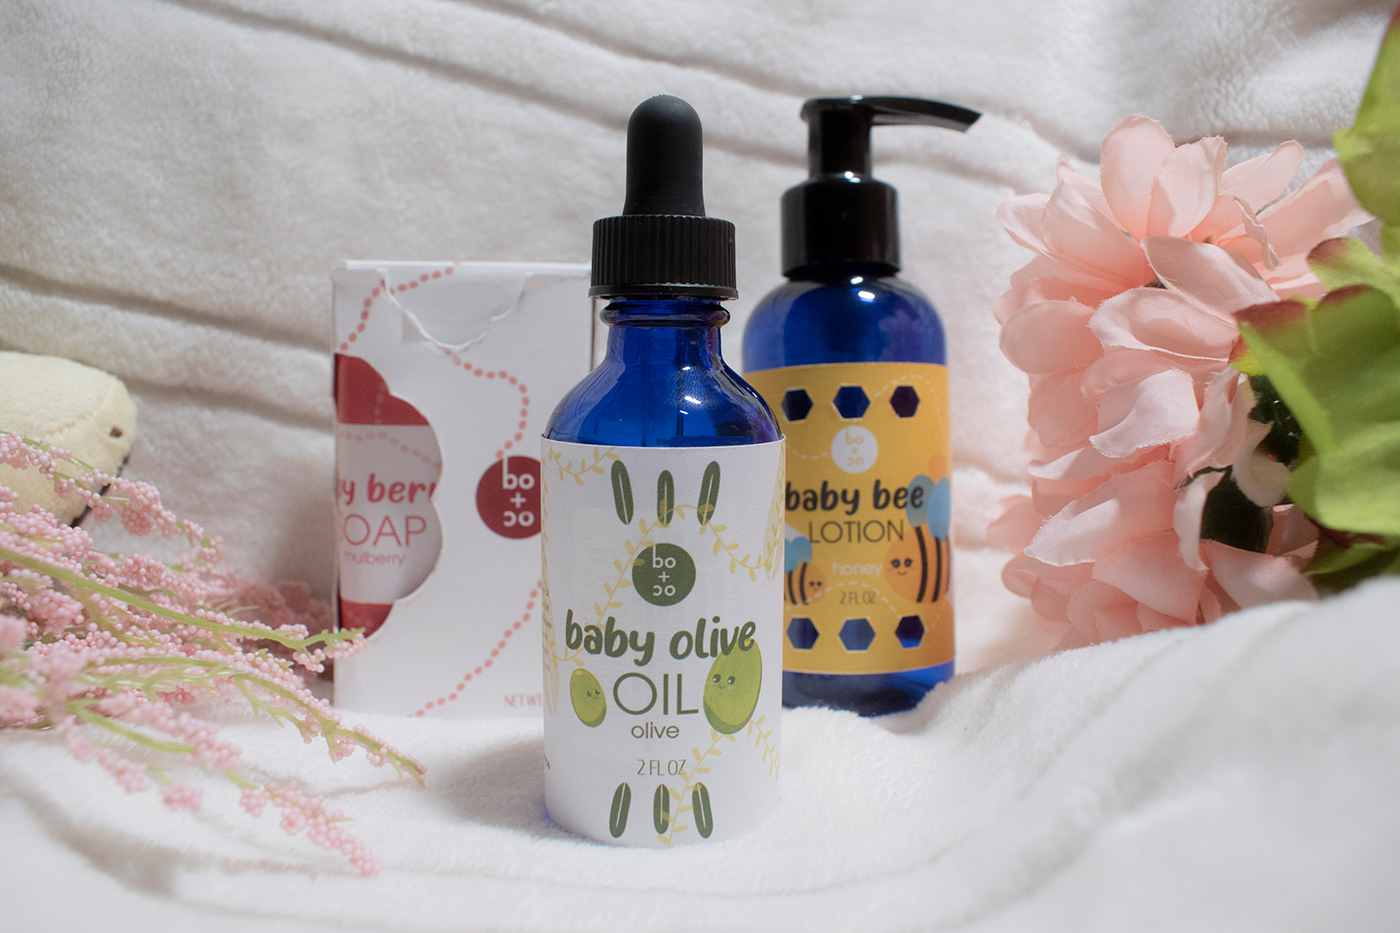 Baby product design baby product packaging baby products body lotion design Logo Design oil packaging design personal care product phtography